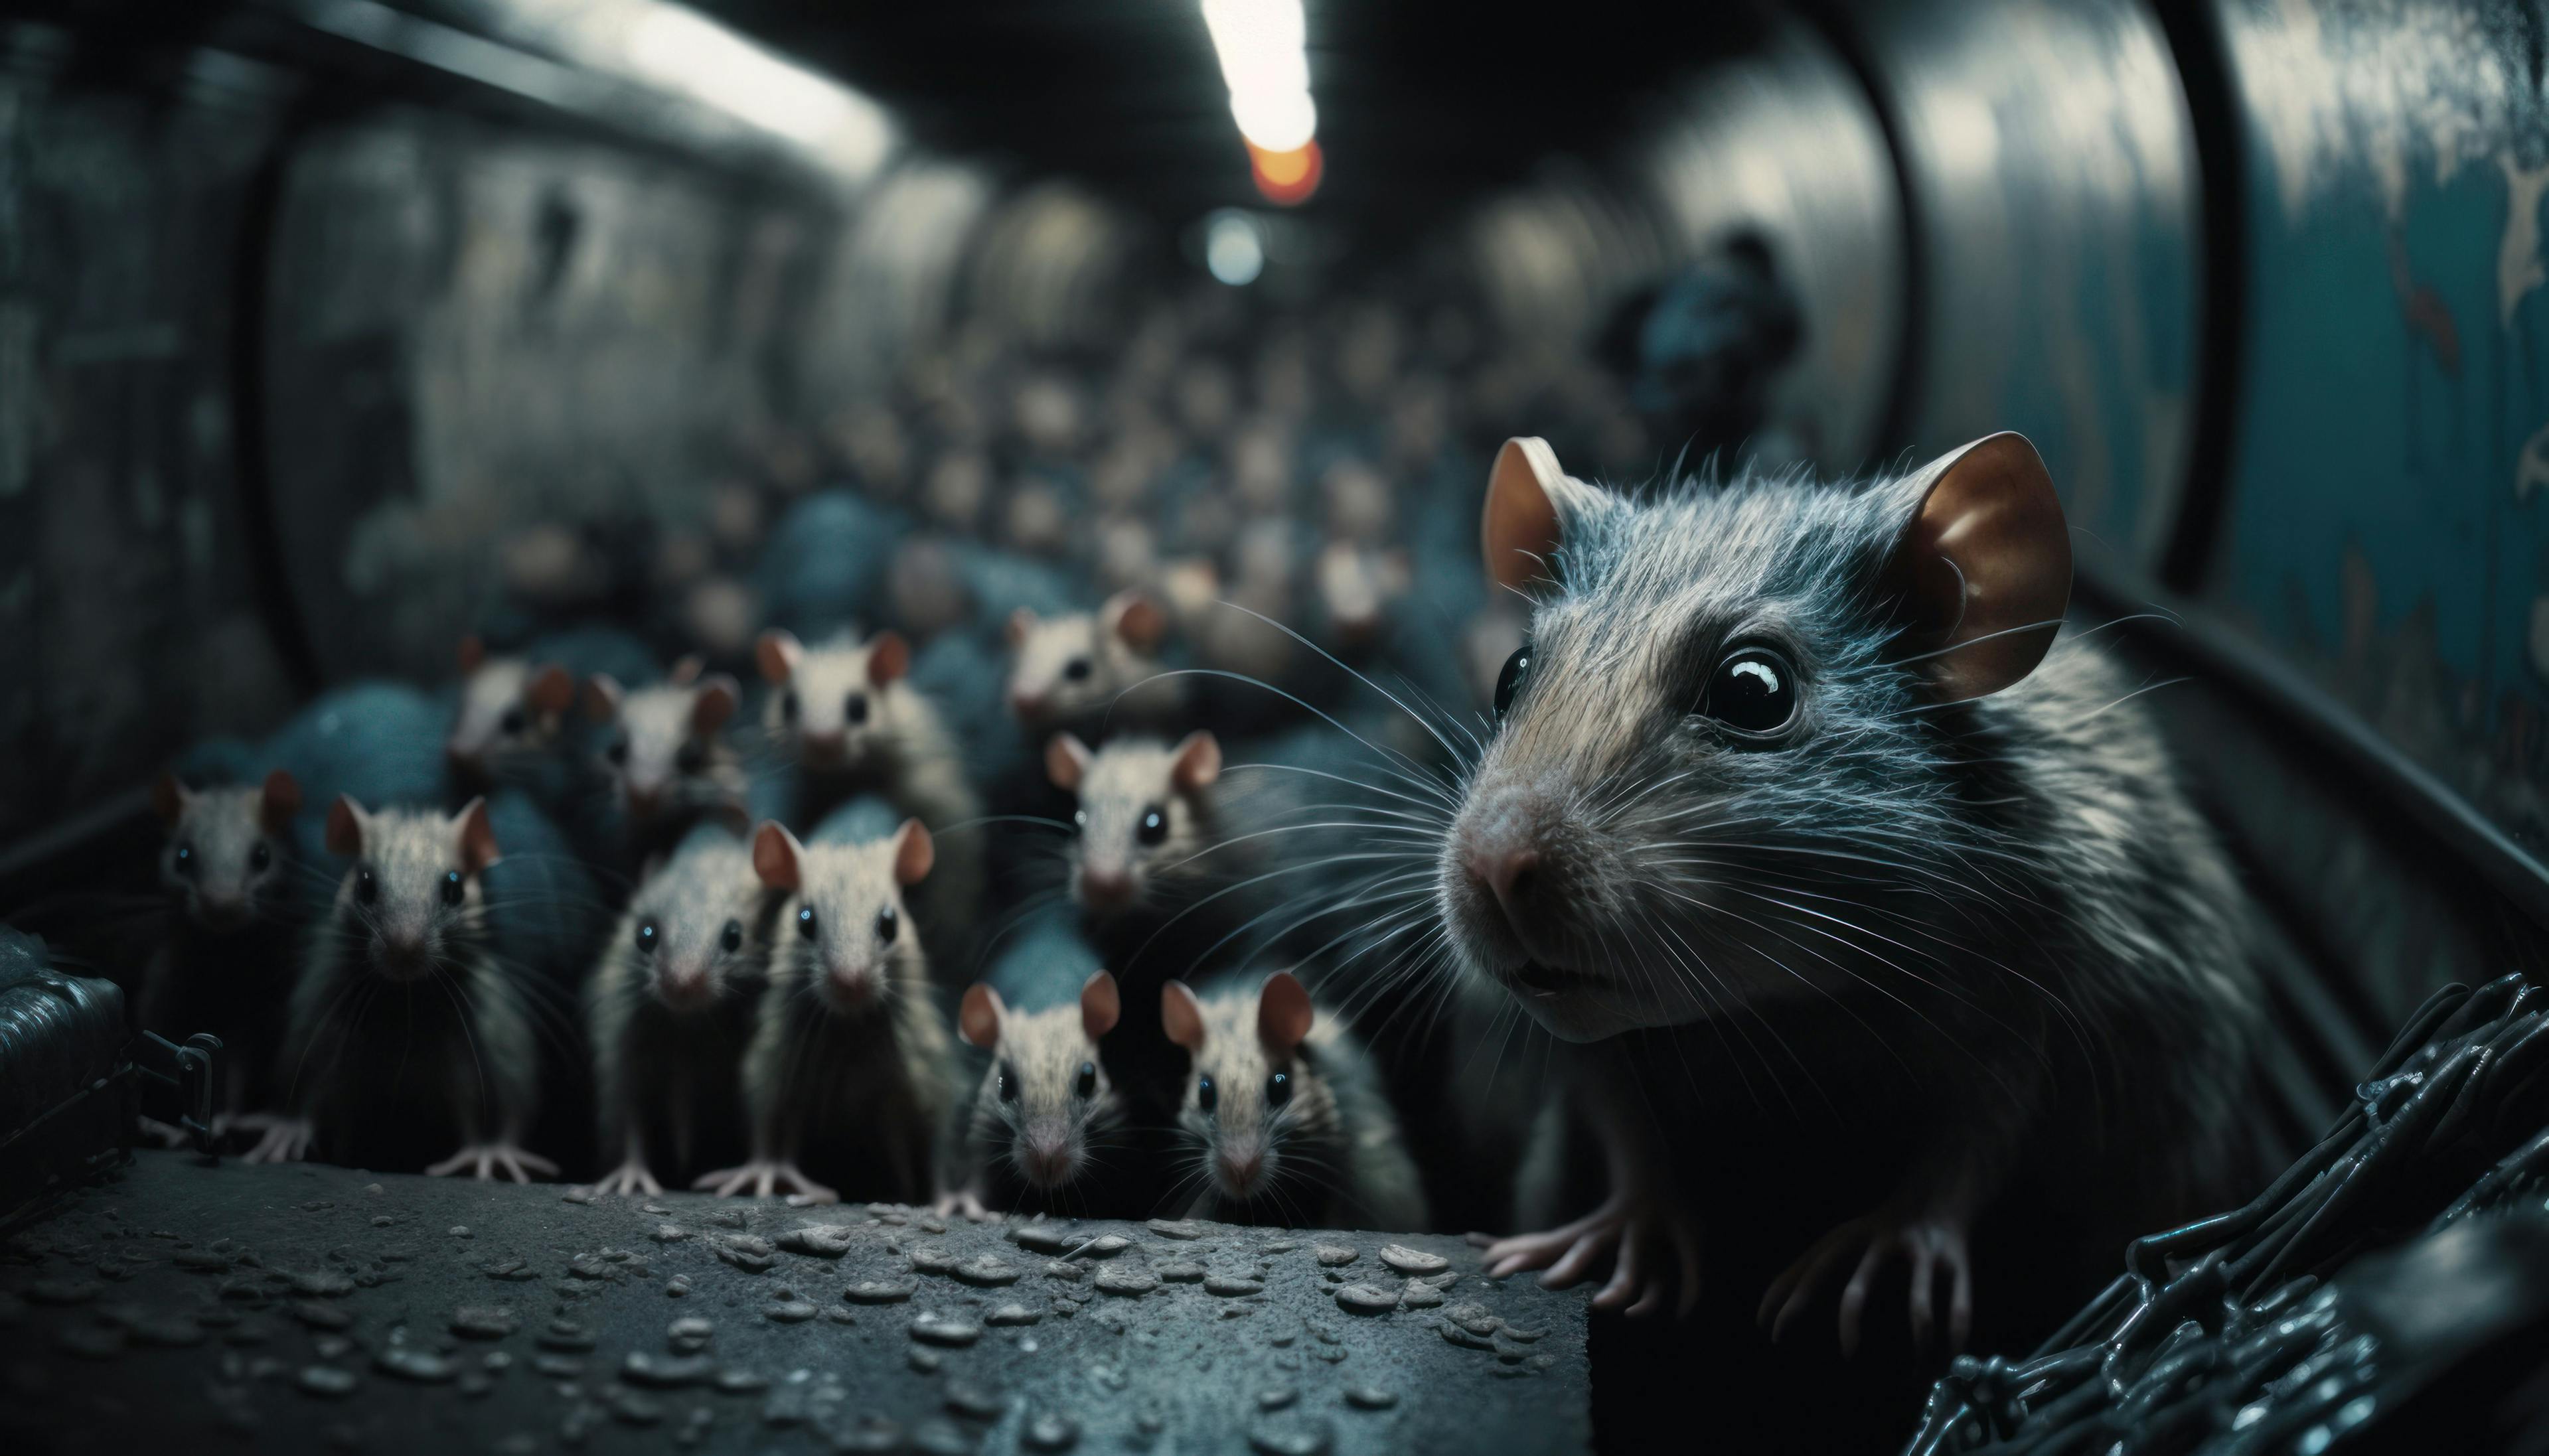 rat plague, lot of rats, bunch of rats, rats in metro, rats invasion, invasion of rats, plague infestation, rodent invasion. Generated with AI | Image Credit: © nishihata - stock.adobe.com.